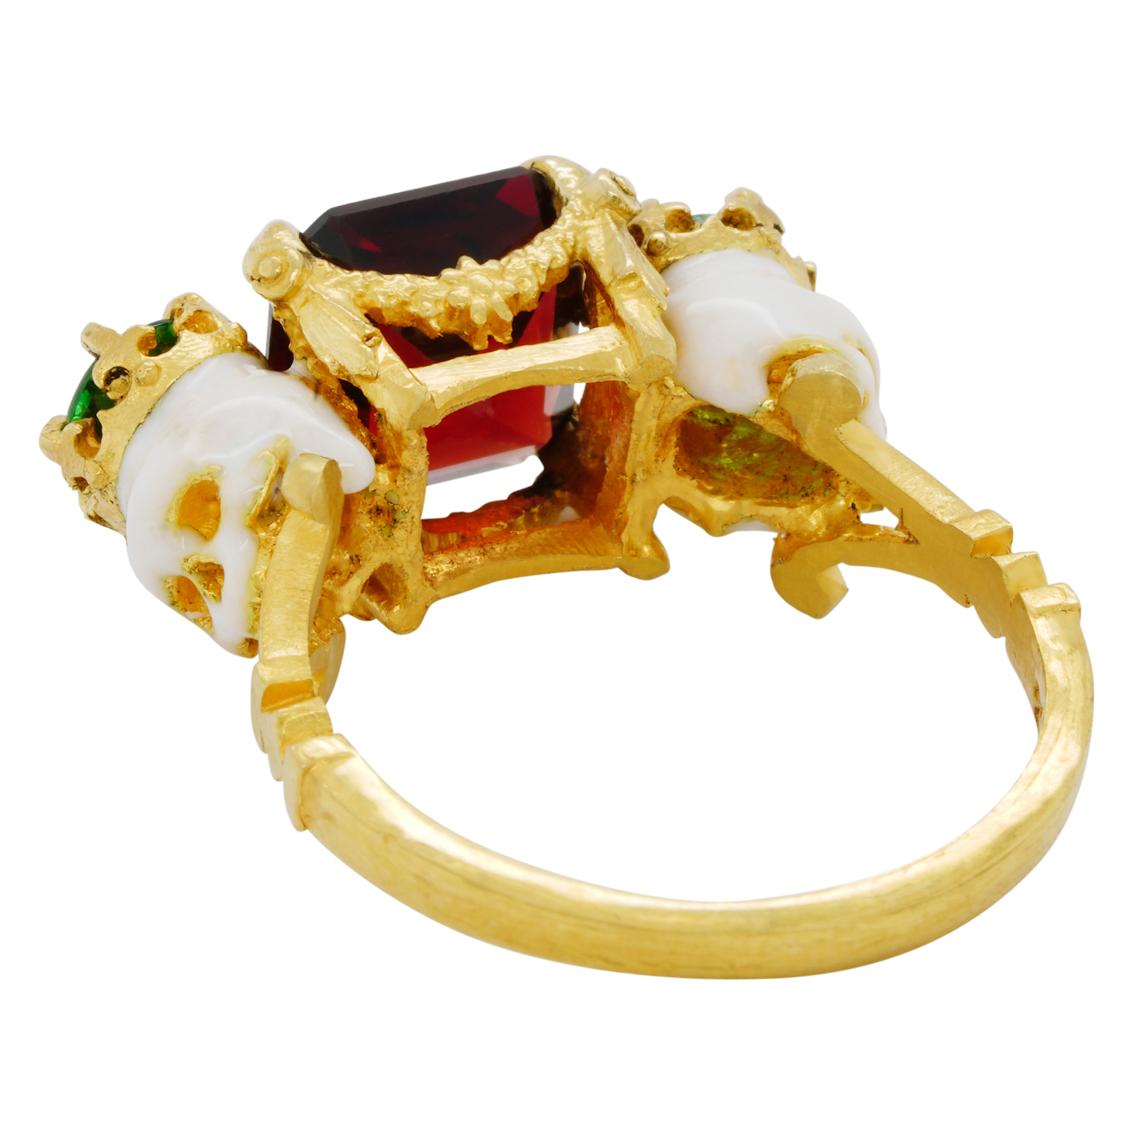 Catacomb Saints Garland Ring in 22 Karat Gold with Red and Tsavorite Garnets 5